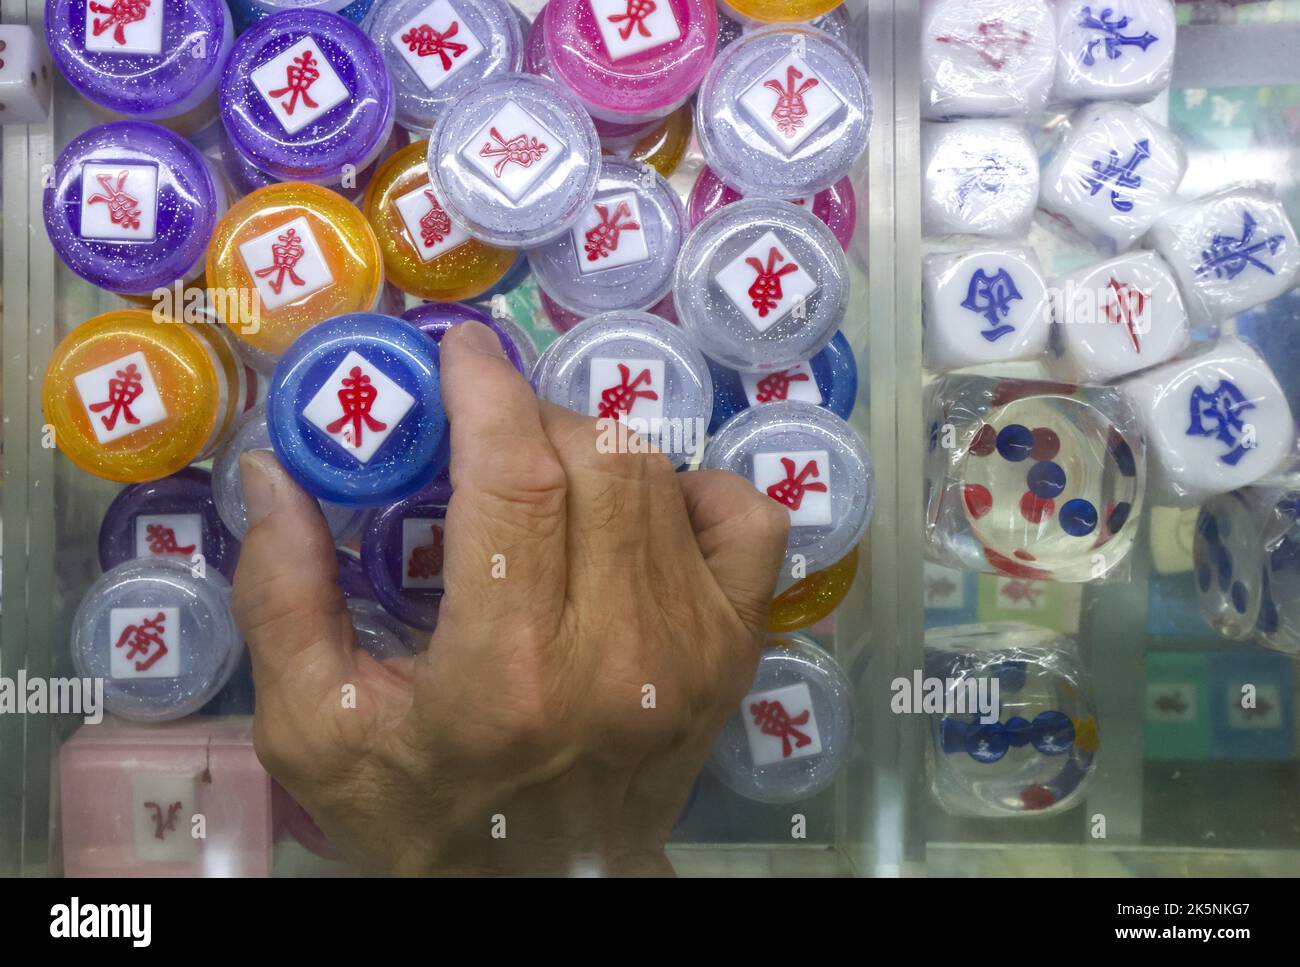 Mahjong tiles at Biu Kee Mah-Jong in Jordan. The old mahjong tile shop is forced to close at the end of October as it is evicted by the Buildings Department.  06OCT22 SCMP/ Edmond So Stock Photo